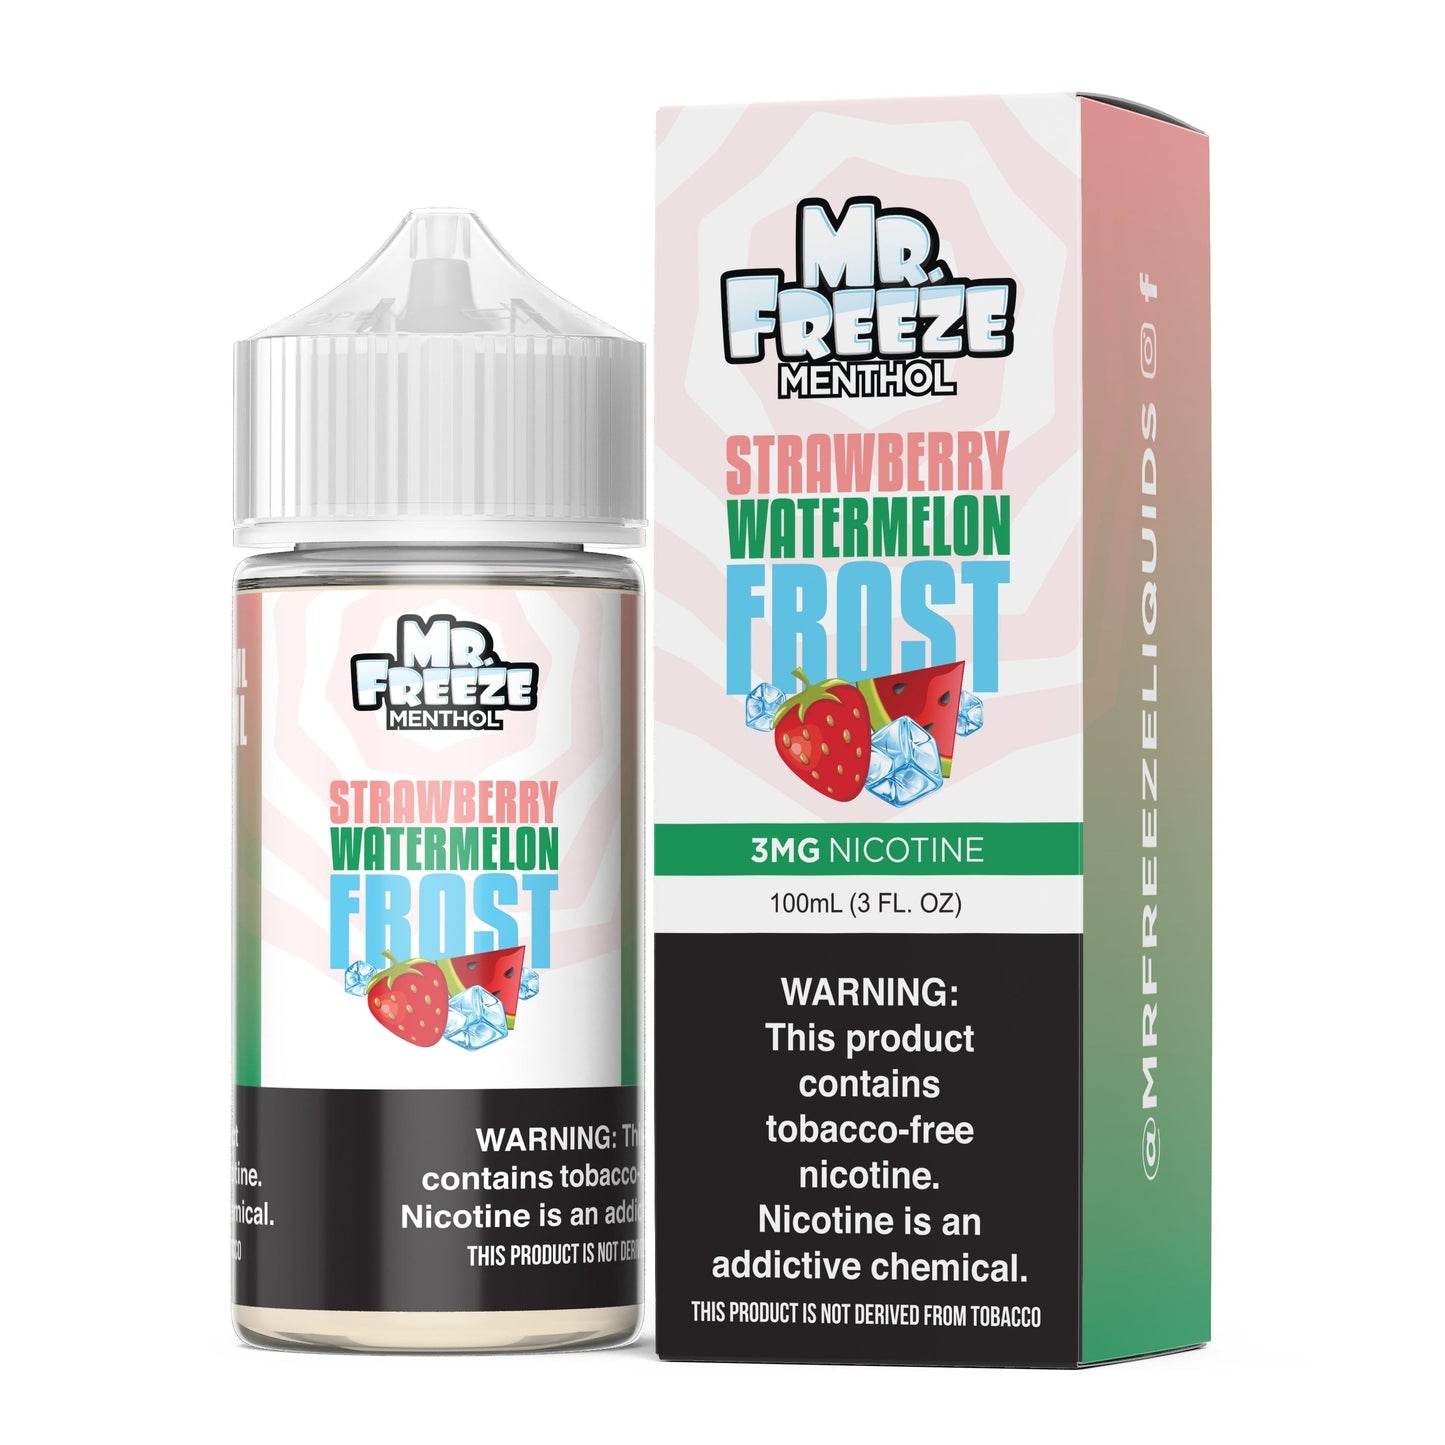 Mr. Freeze Tobacco-Free Nicotine Series | 100mL - Strawberry Watermelon Frost with packaging